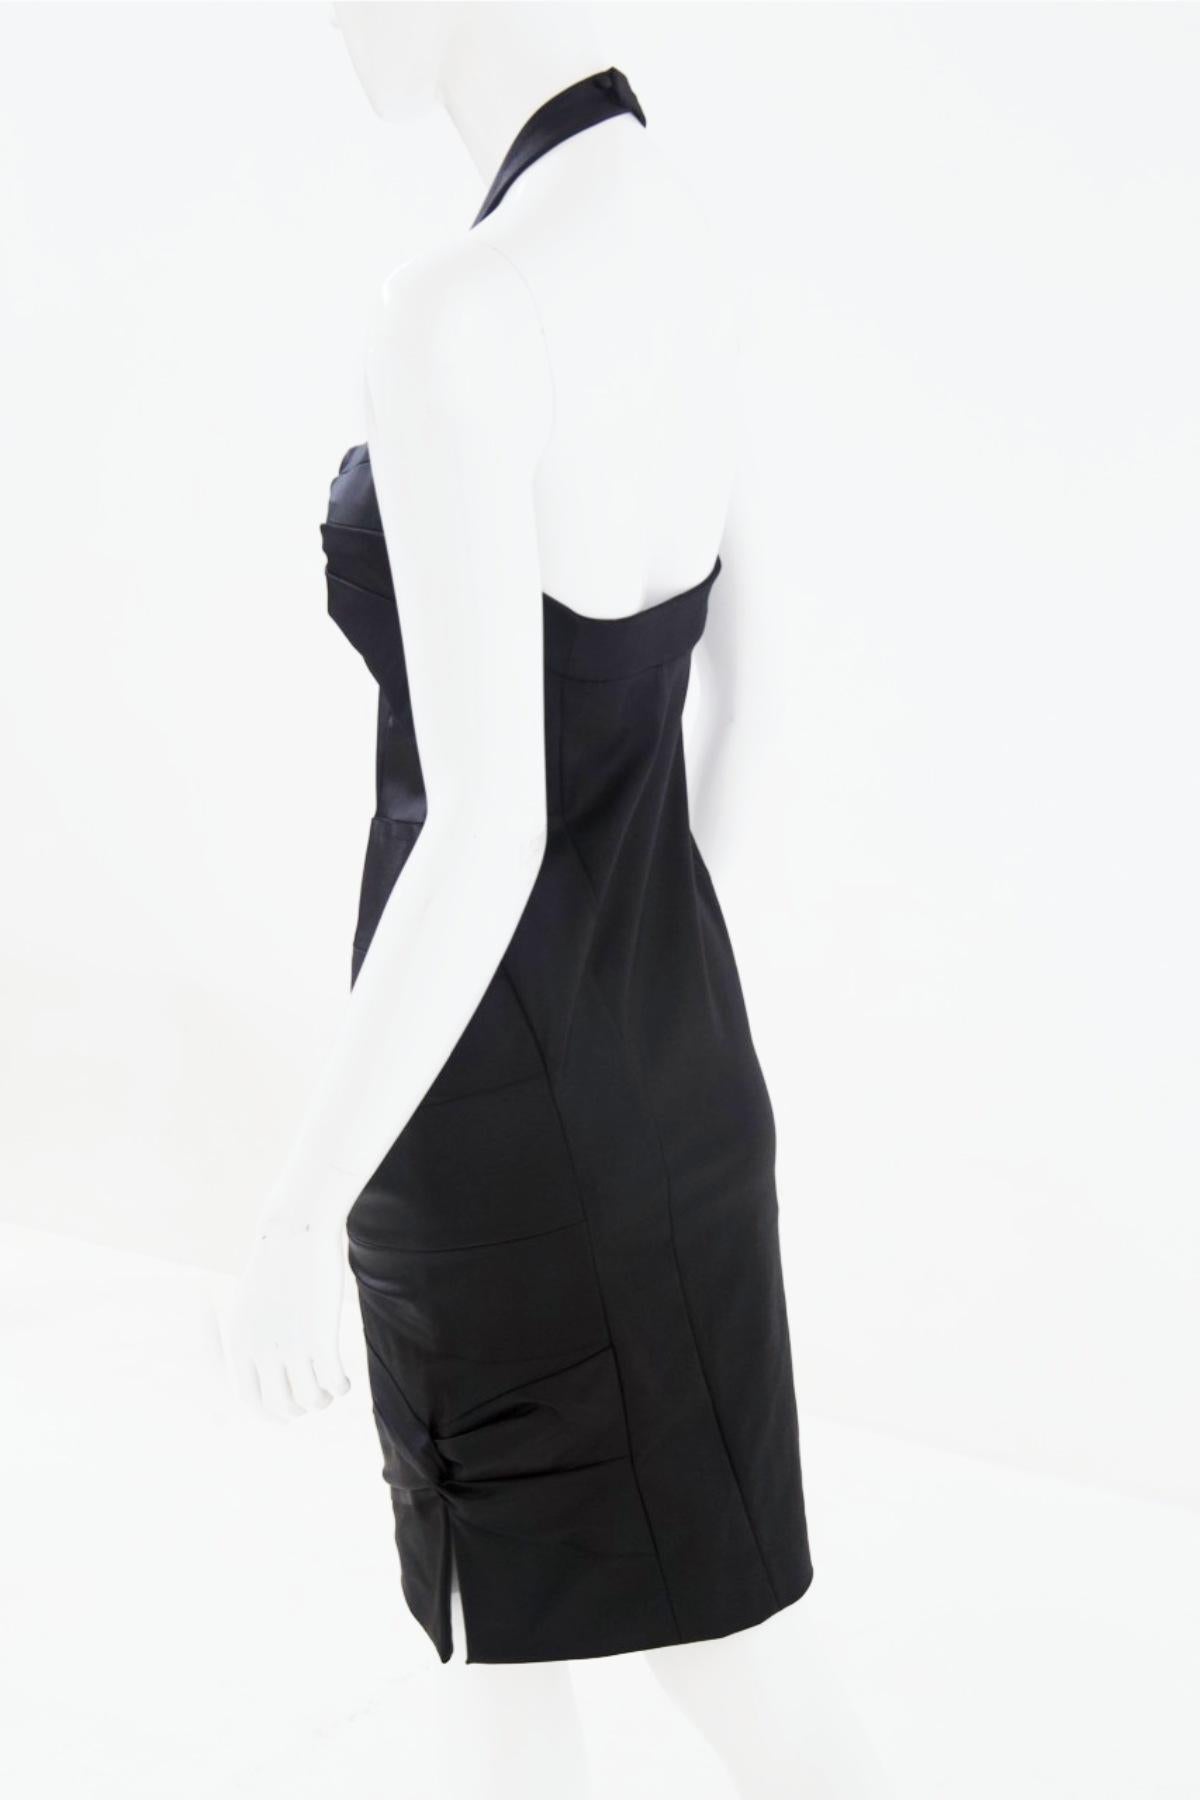 Christian Dior by John Galliano Black Satin Silk Lined Knot Dress For Sale 7